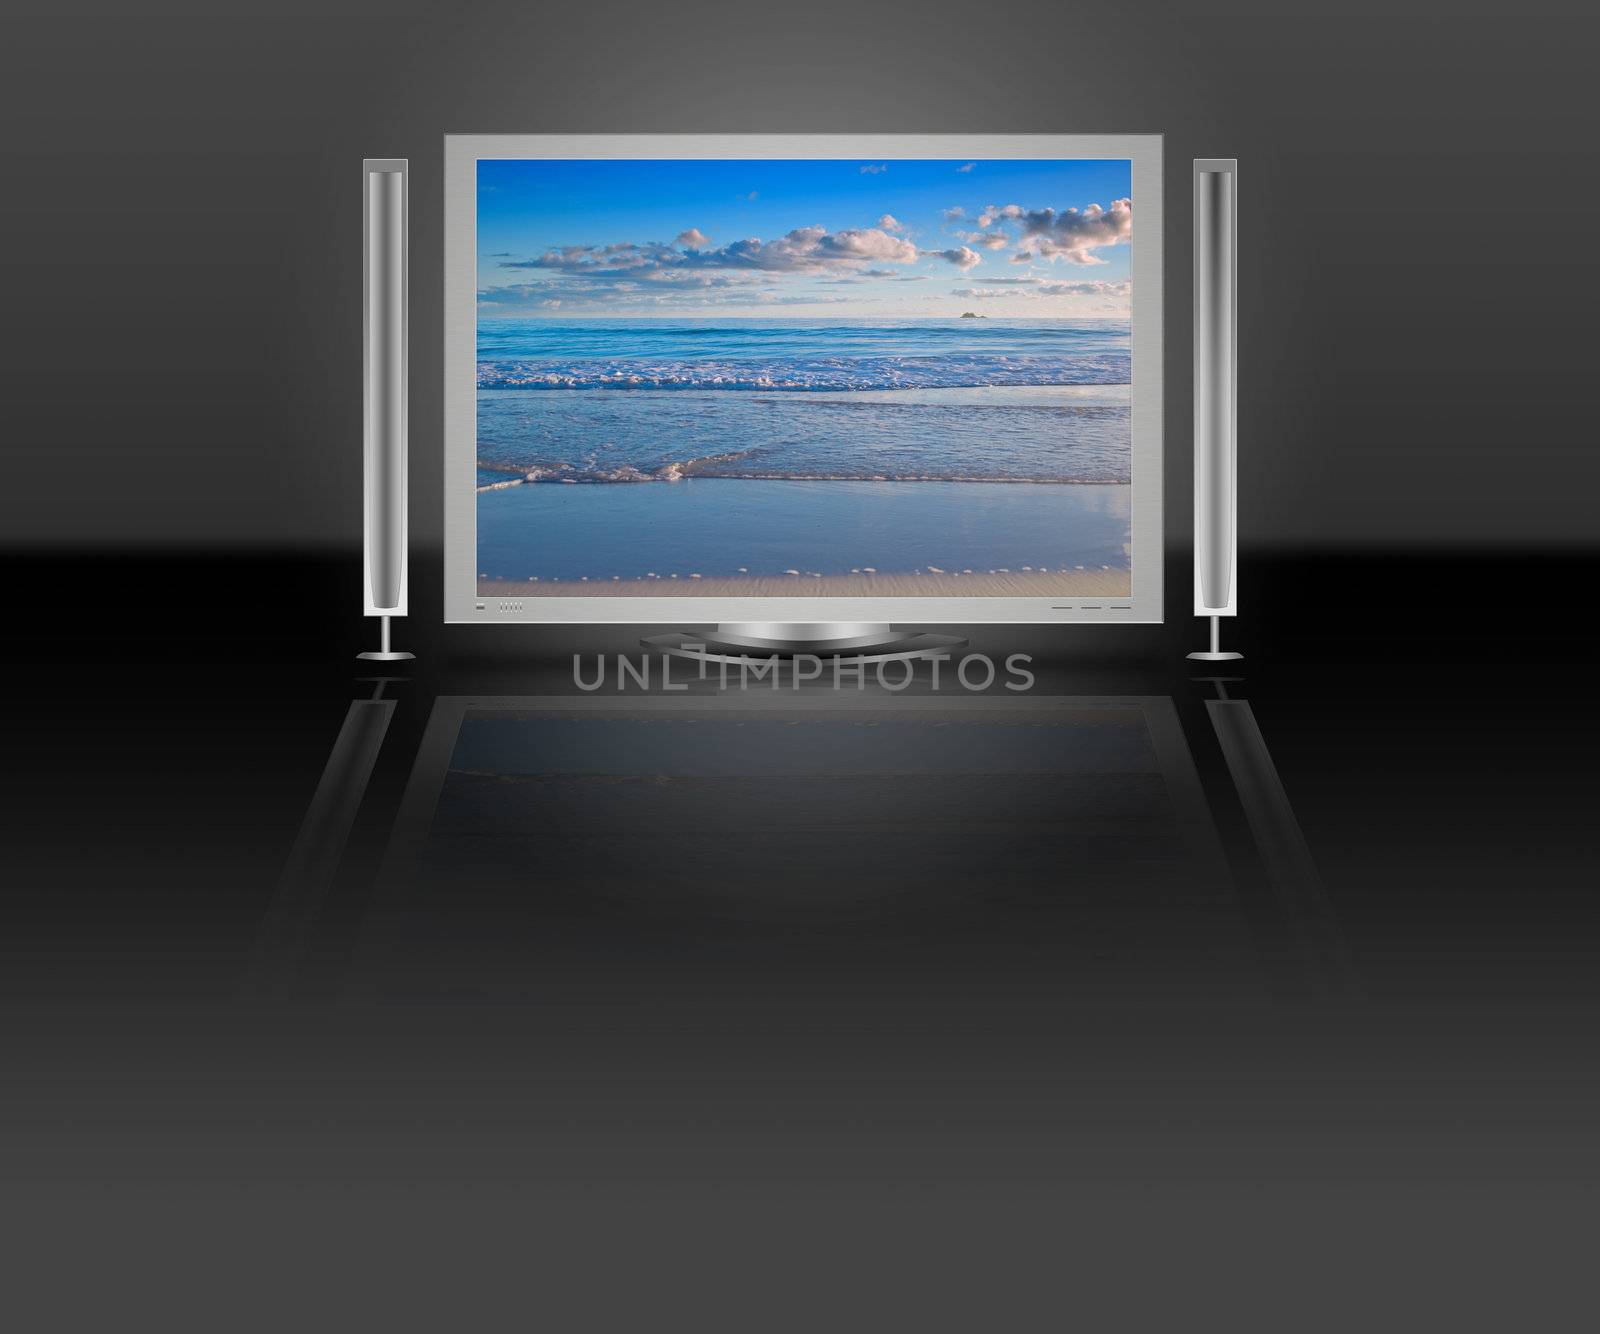 great illustration of a lcd or plasma tv showing a nature beach scene